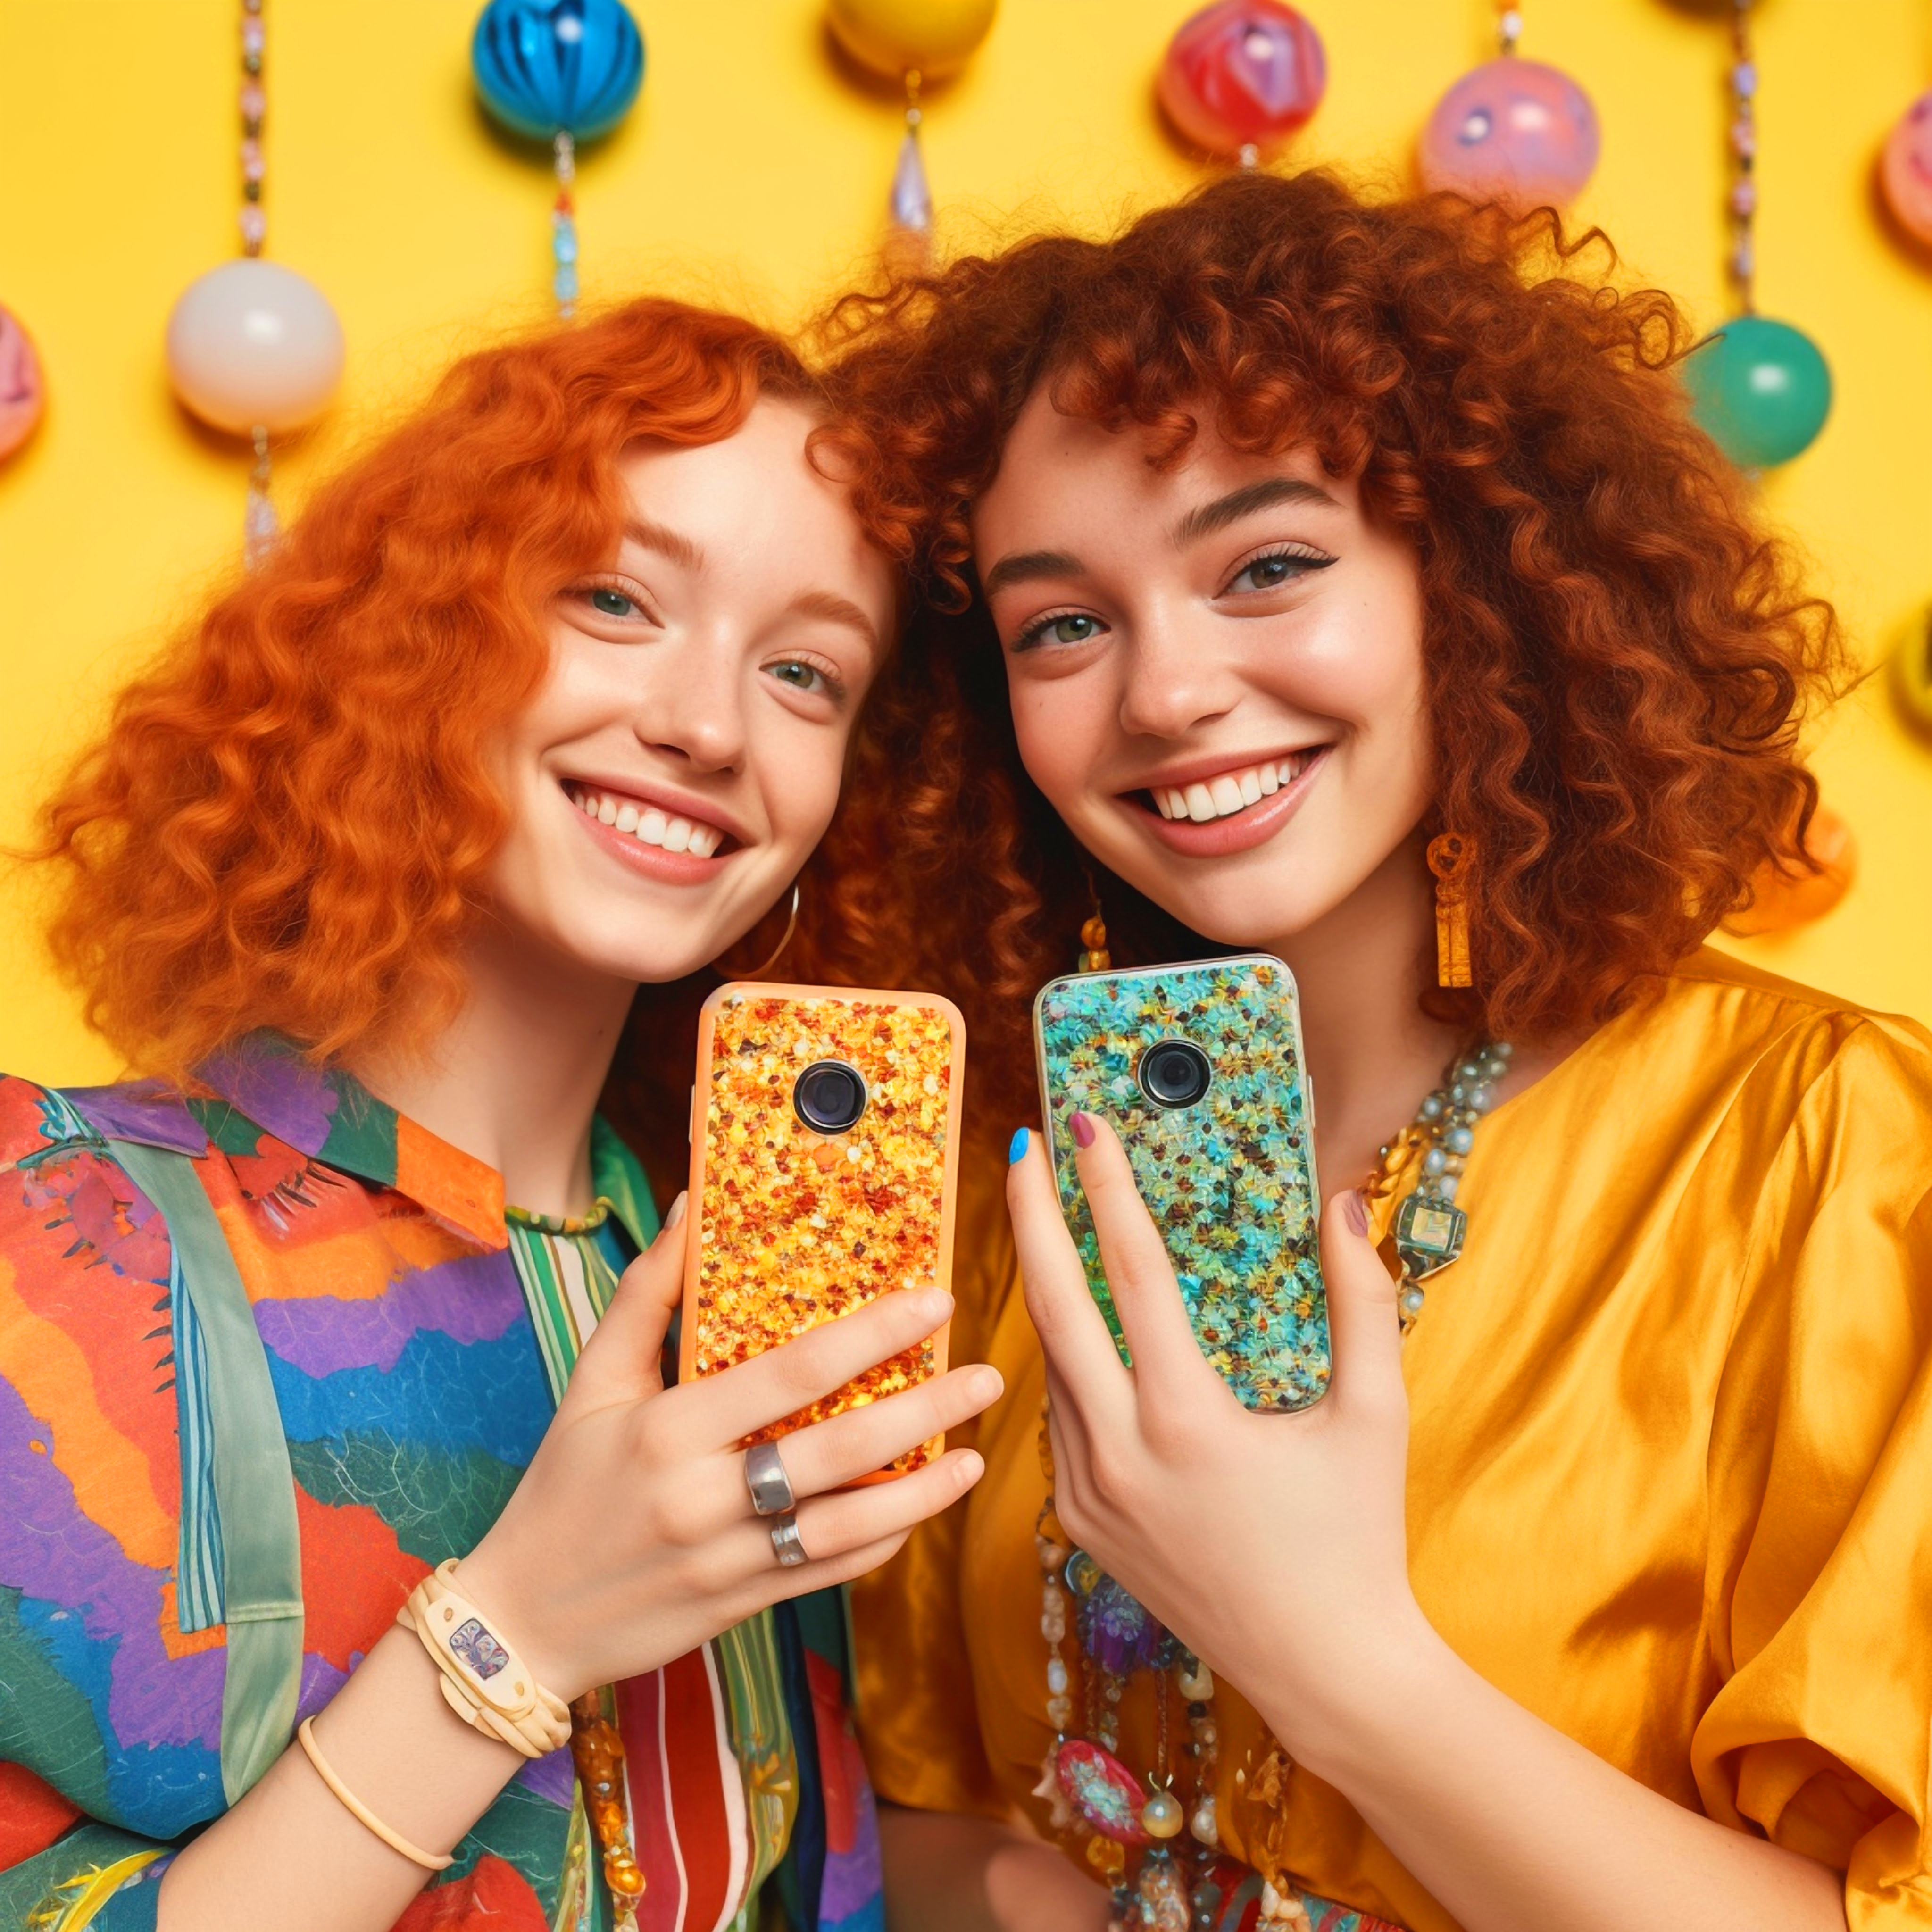 tinywow_BBUser_two_joyful_american_girls_holding_their_two_iPhones_14_w_23086394_33d6af10-4780-4b4c-b554-420f79e995c0.png